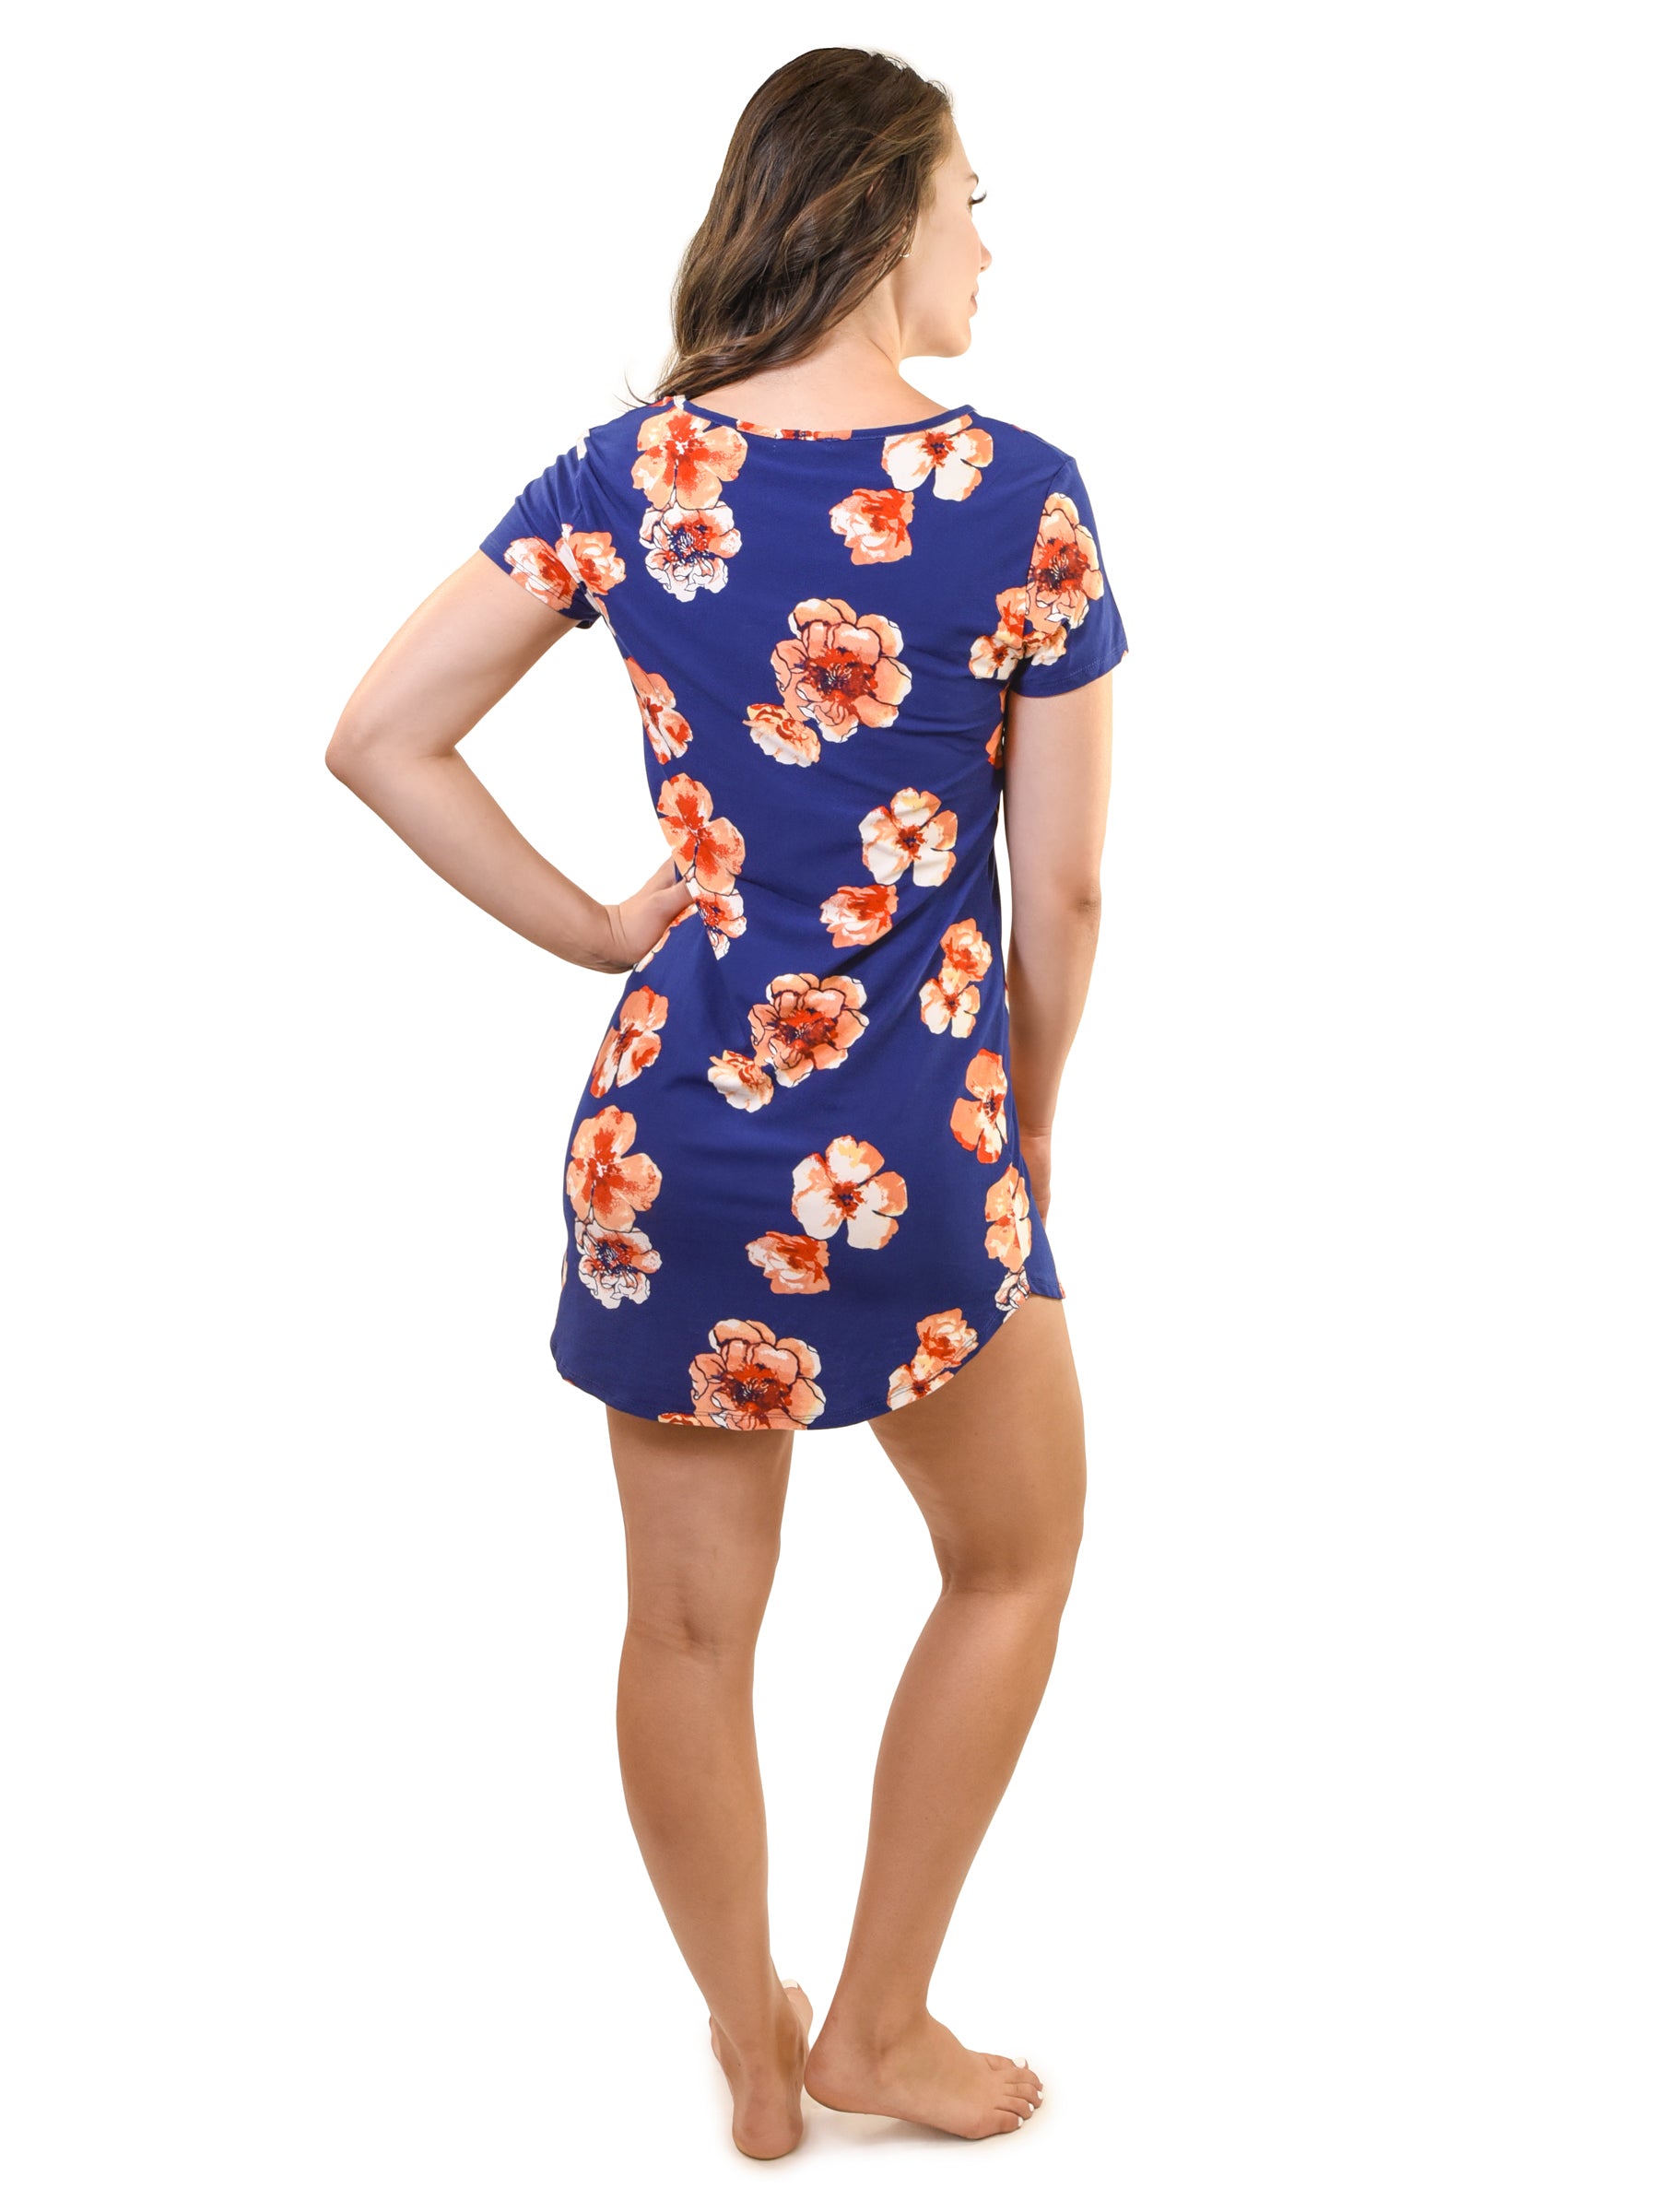 Young USA® Women's Comfy T-Shirt Dress in Navy with Orange Flowers